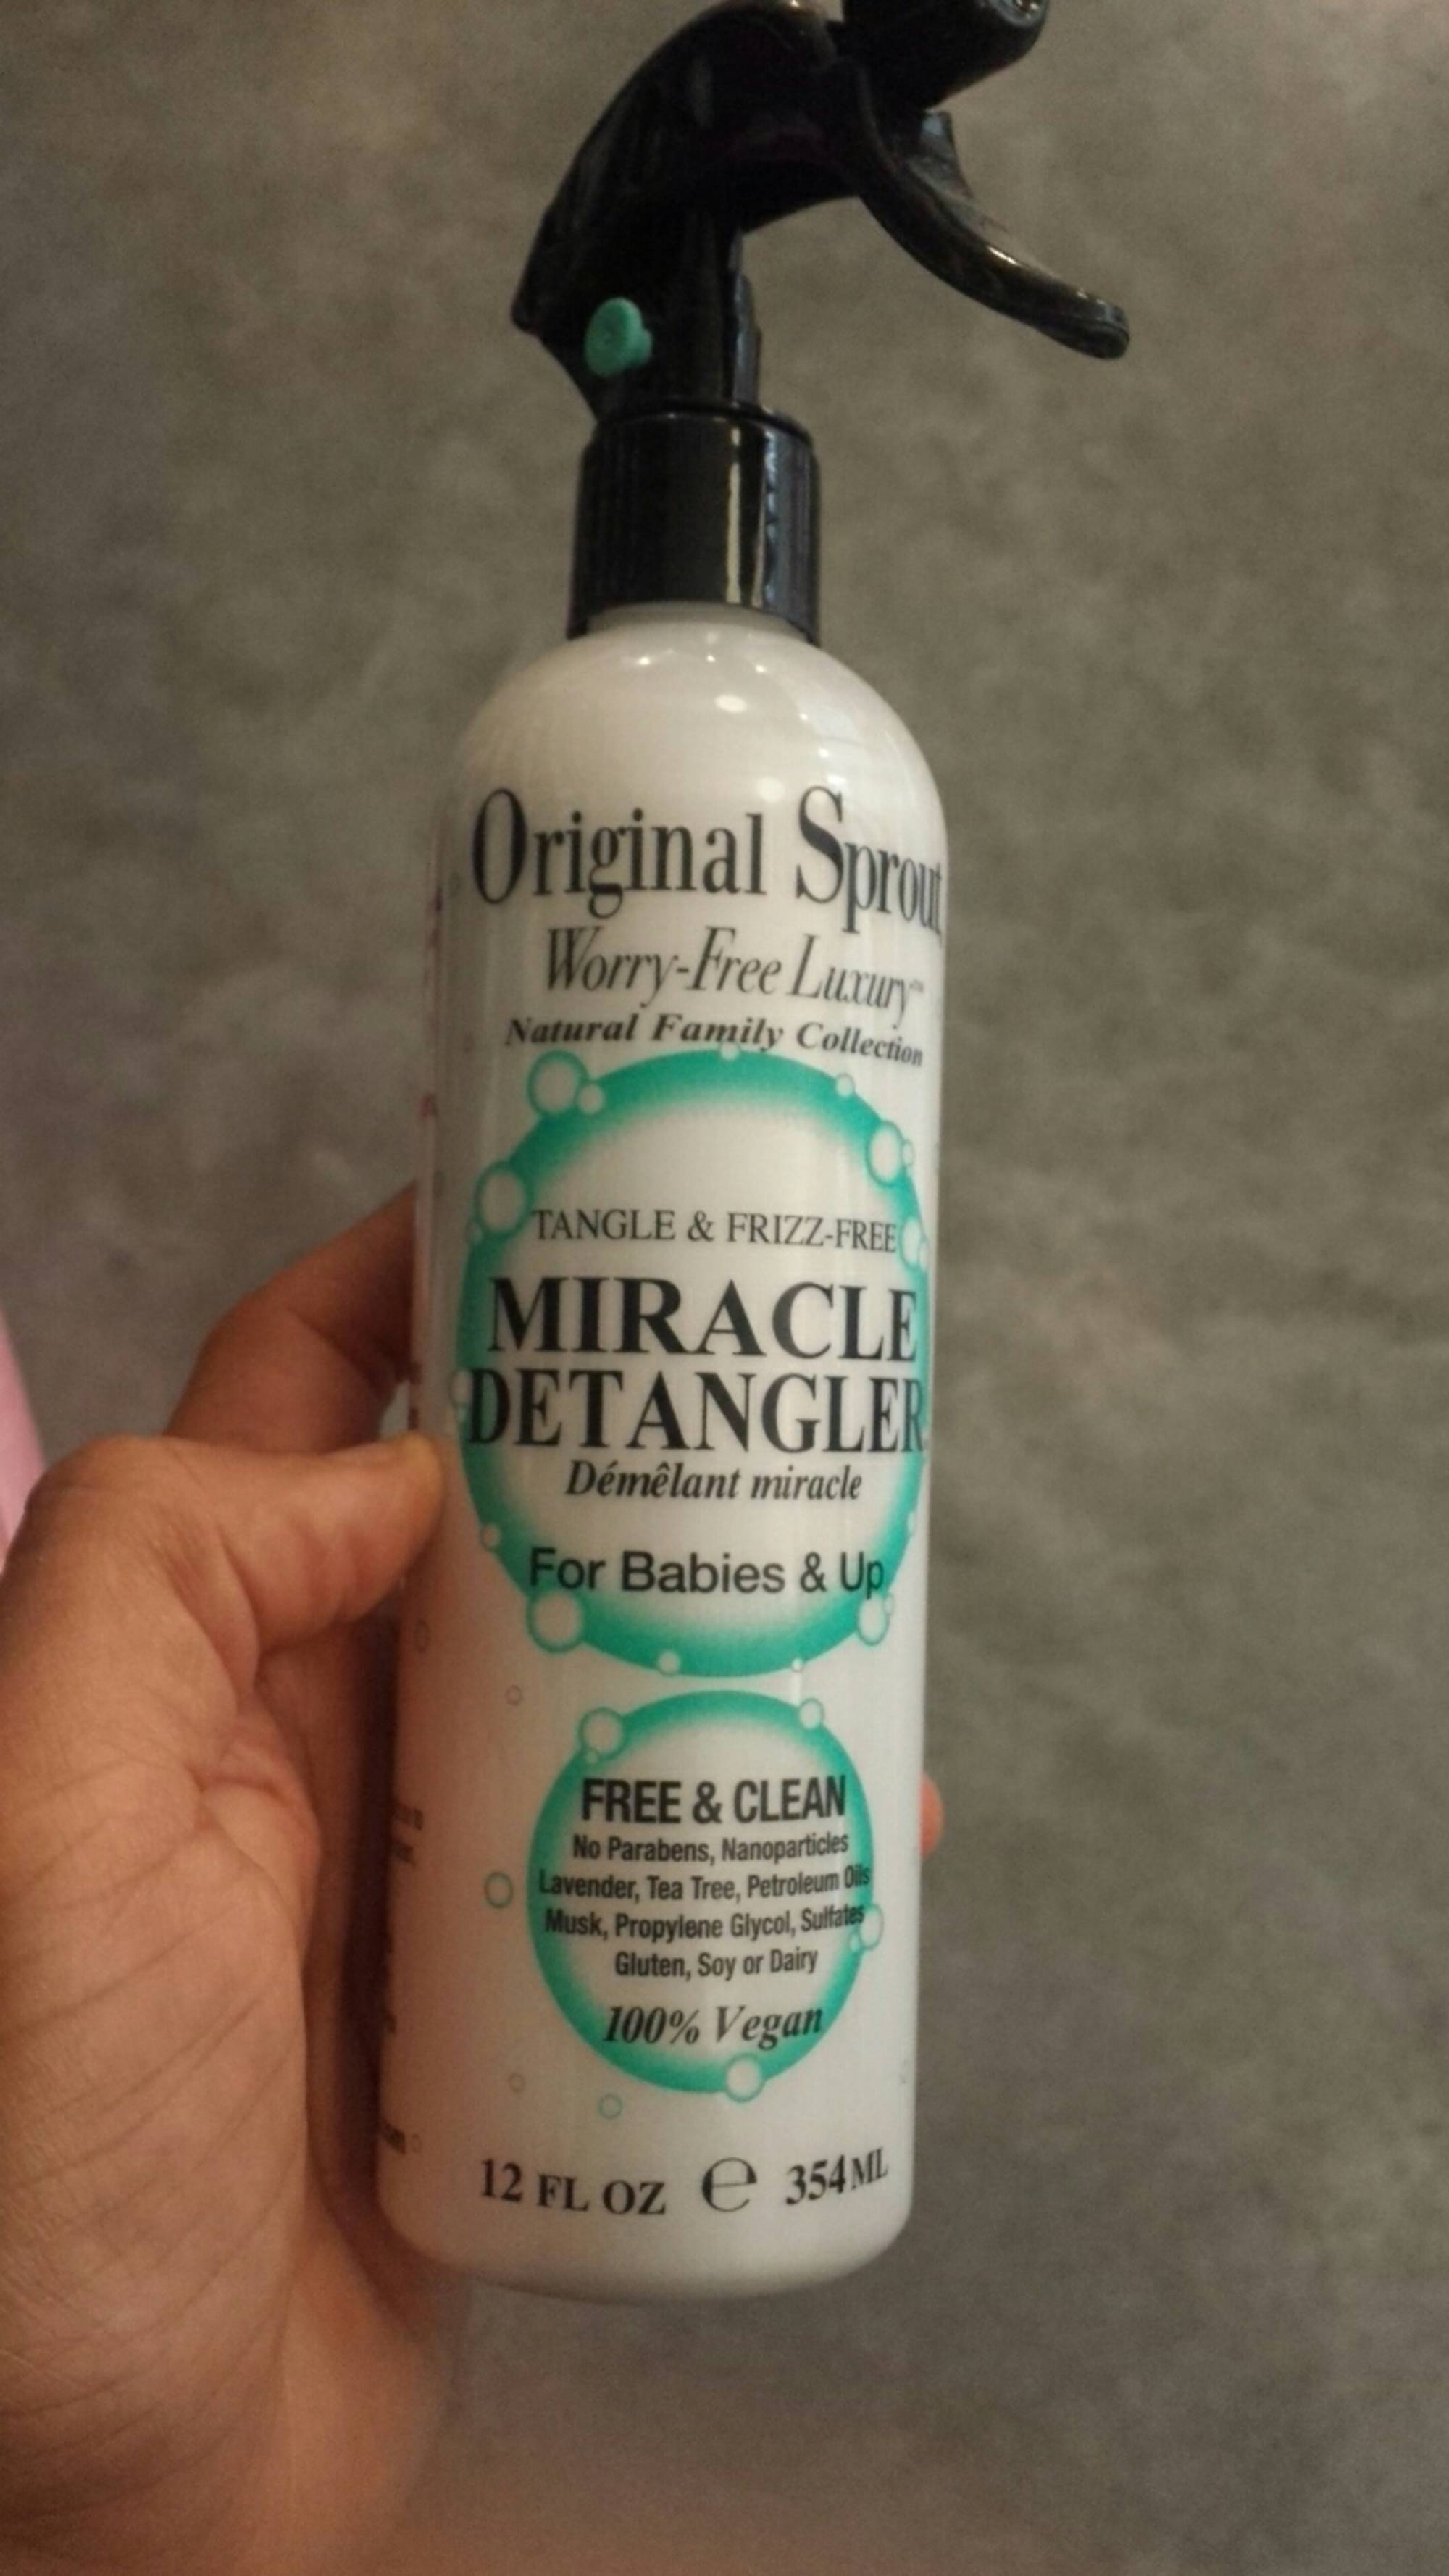 ORIGINAL SPROUT - Tangle & frizz-free - Démêlant miracle